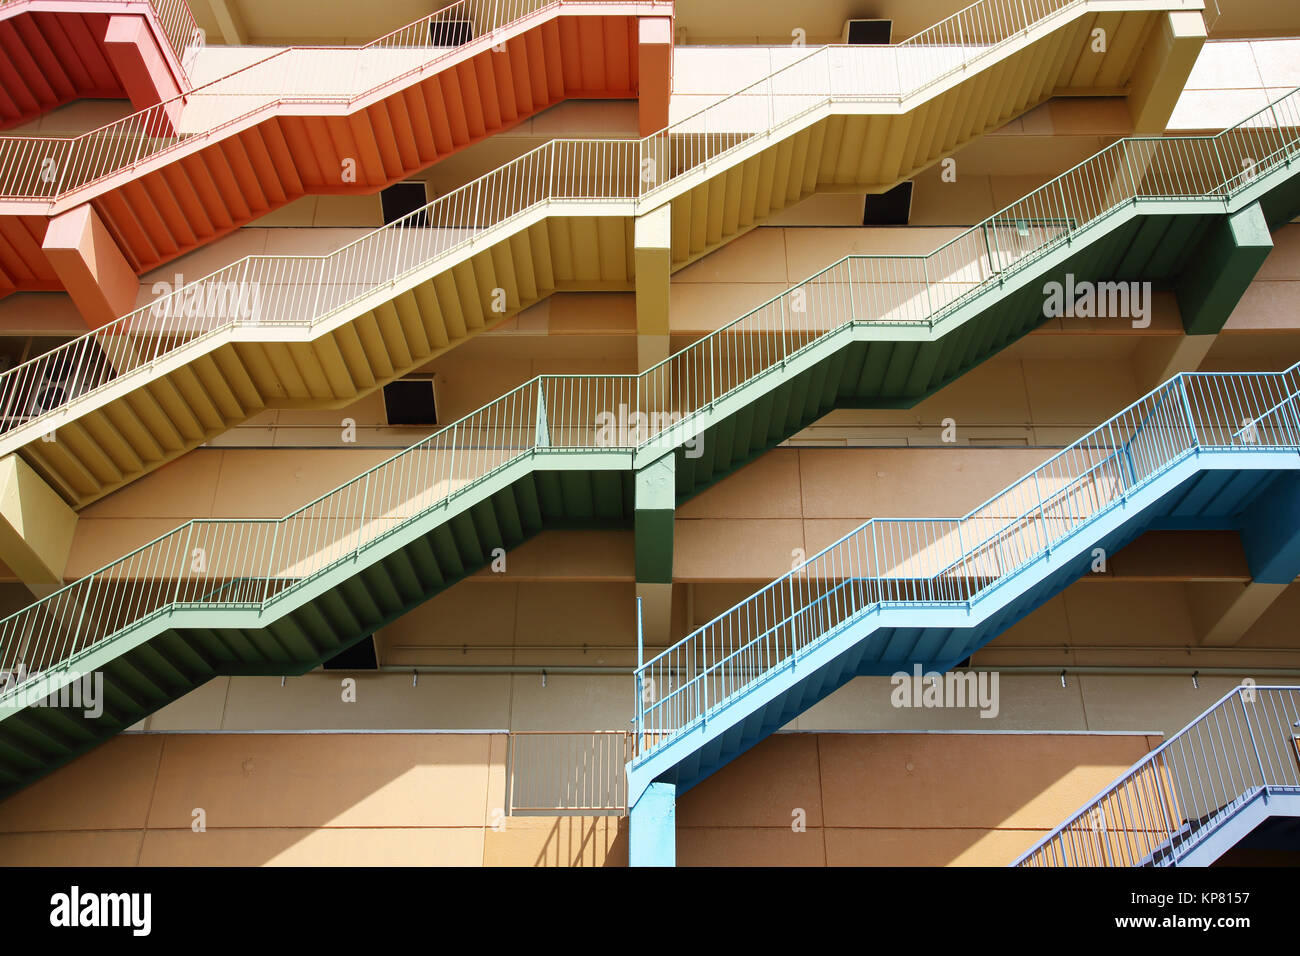 Abstract fire escape stairs background Stock Photo